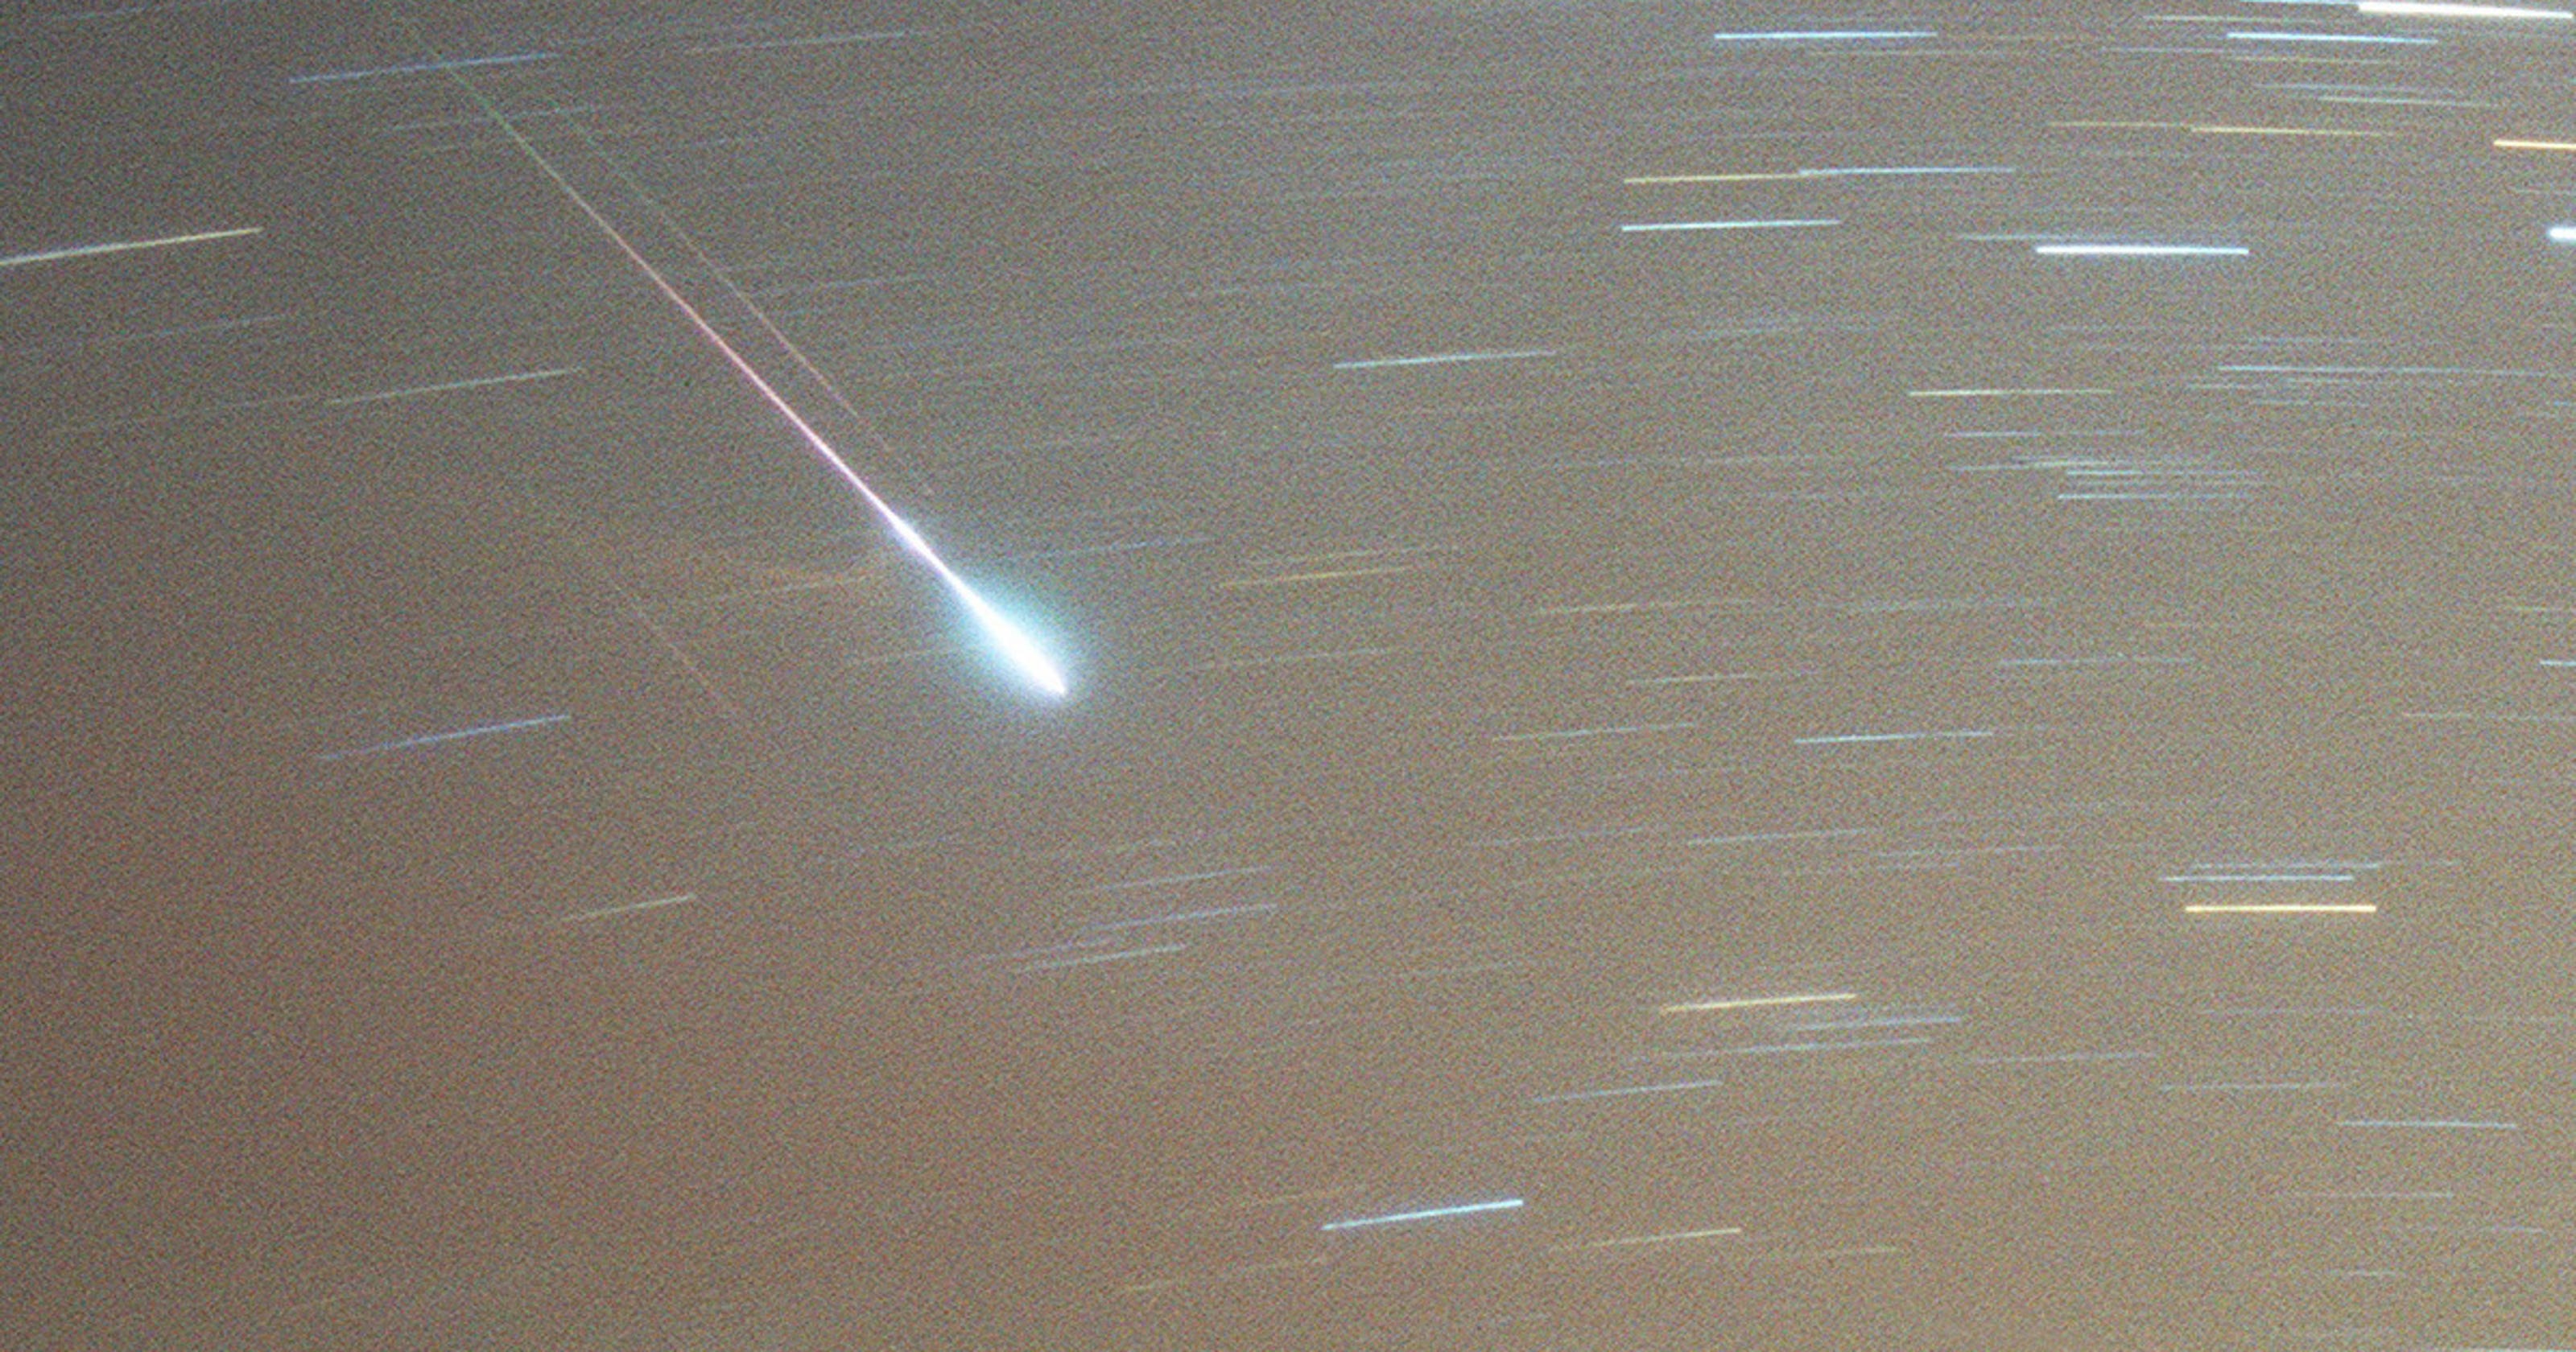 How To View The Leonids Meteor Shower In Arizona On Tuesday Night Wednesday Morning